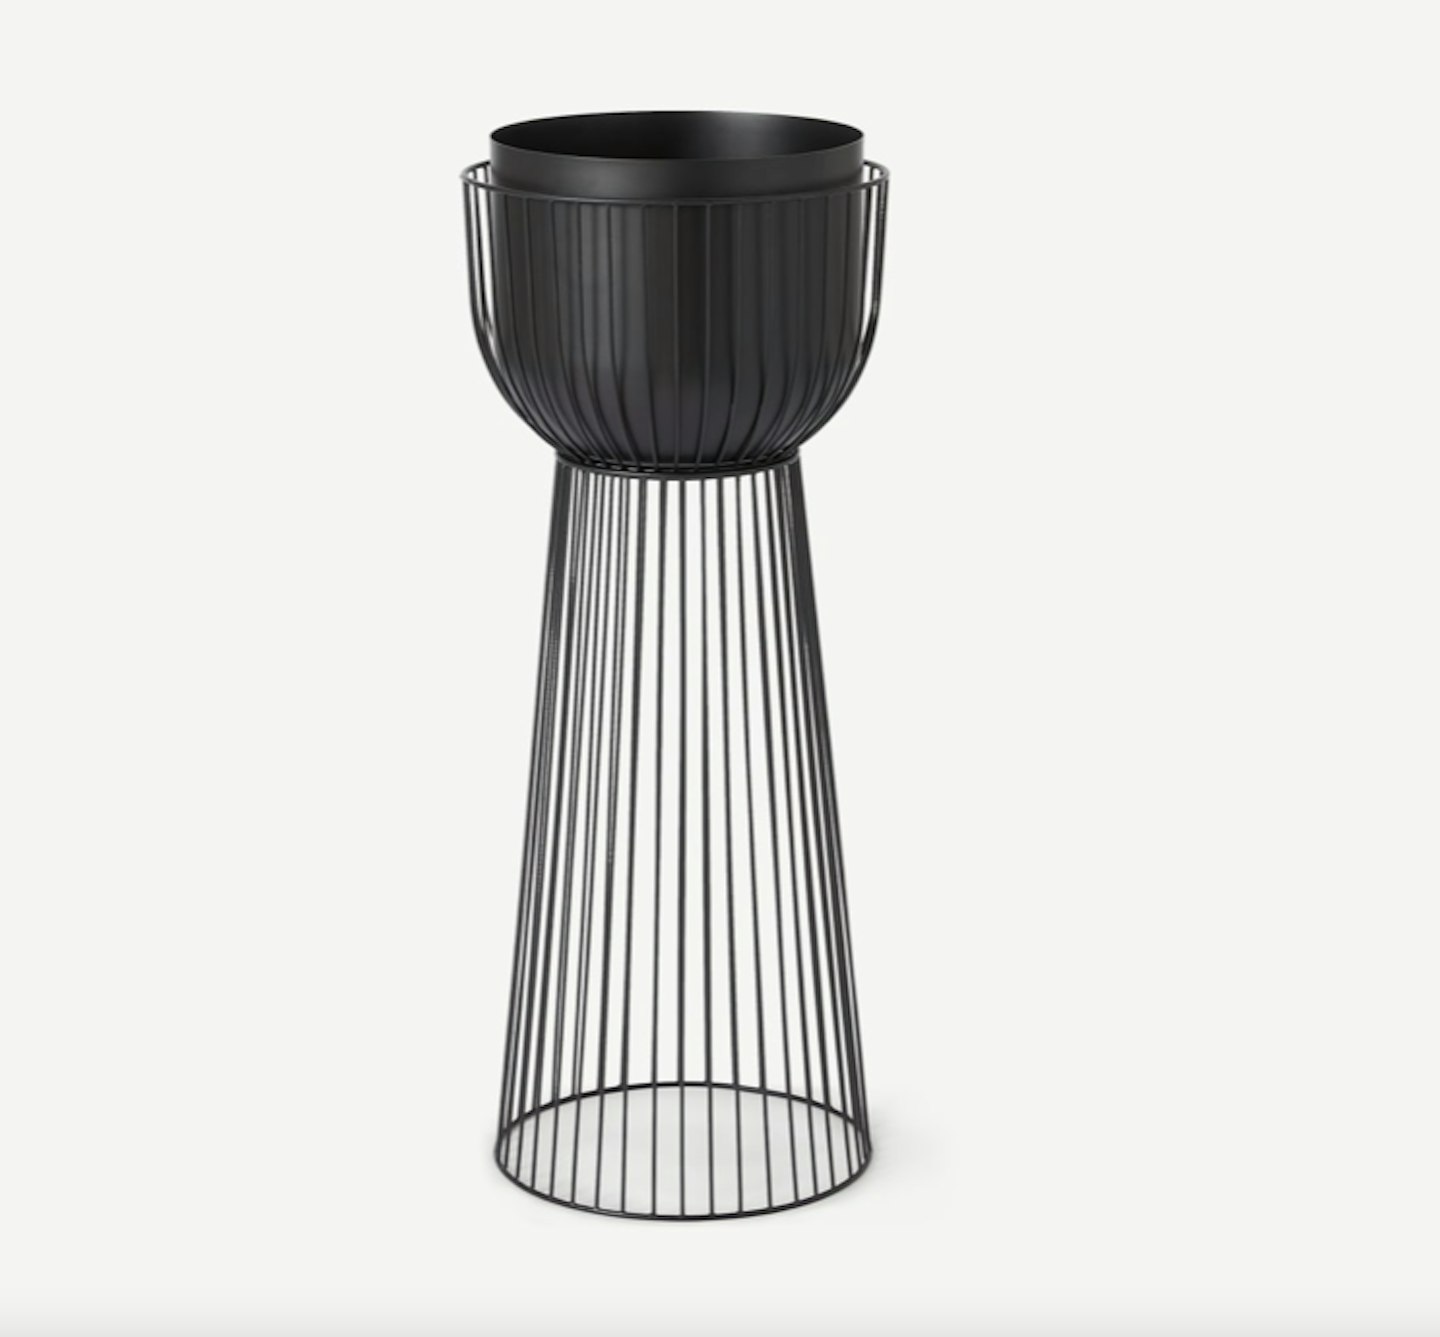 MADE, Carole  Single Large Planter with Stand, Matte Black, £140